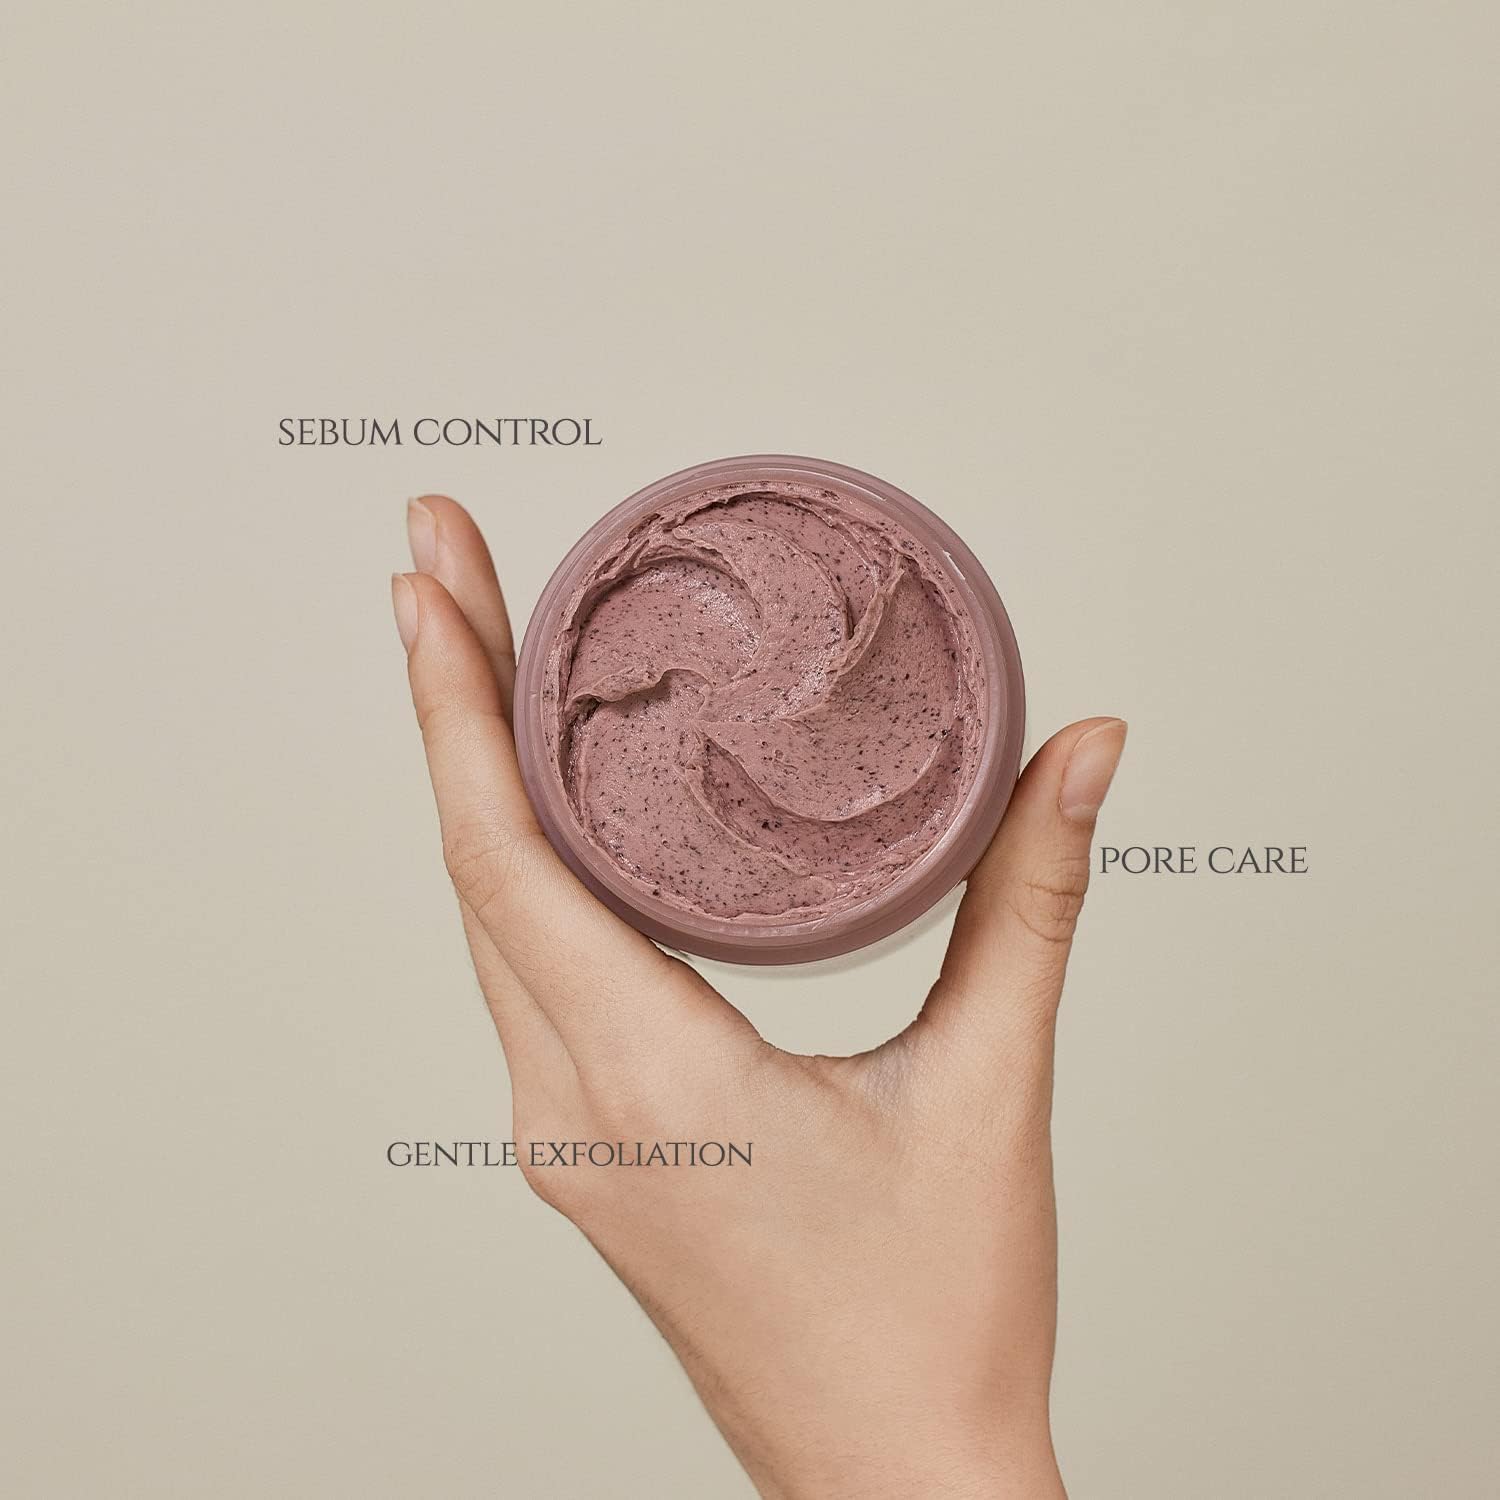 Beauty of Joseon Red Bean Refreshing Pore Mask from Beauty of Joseon